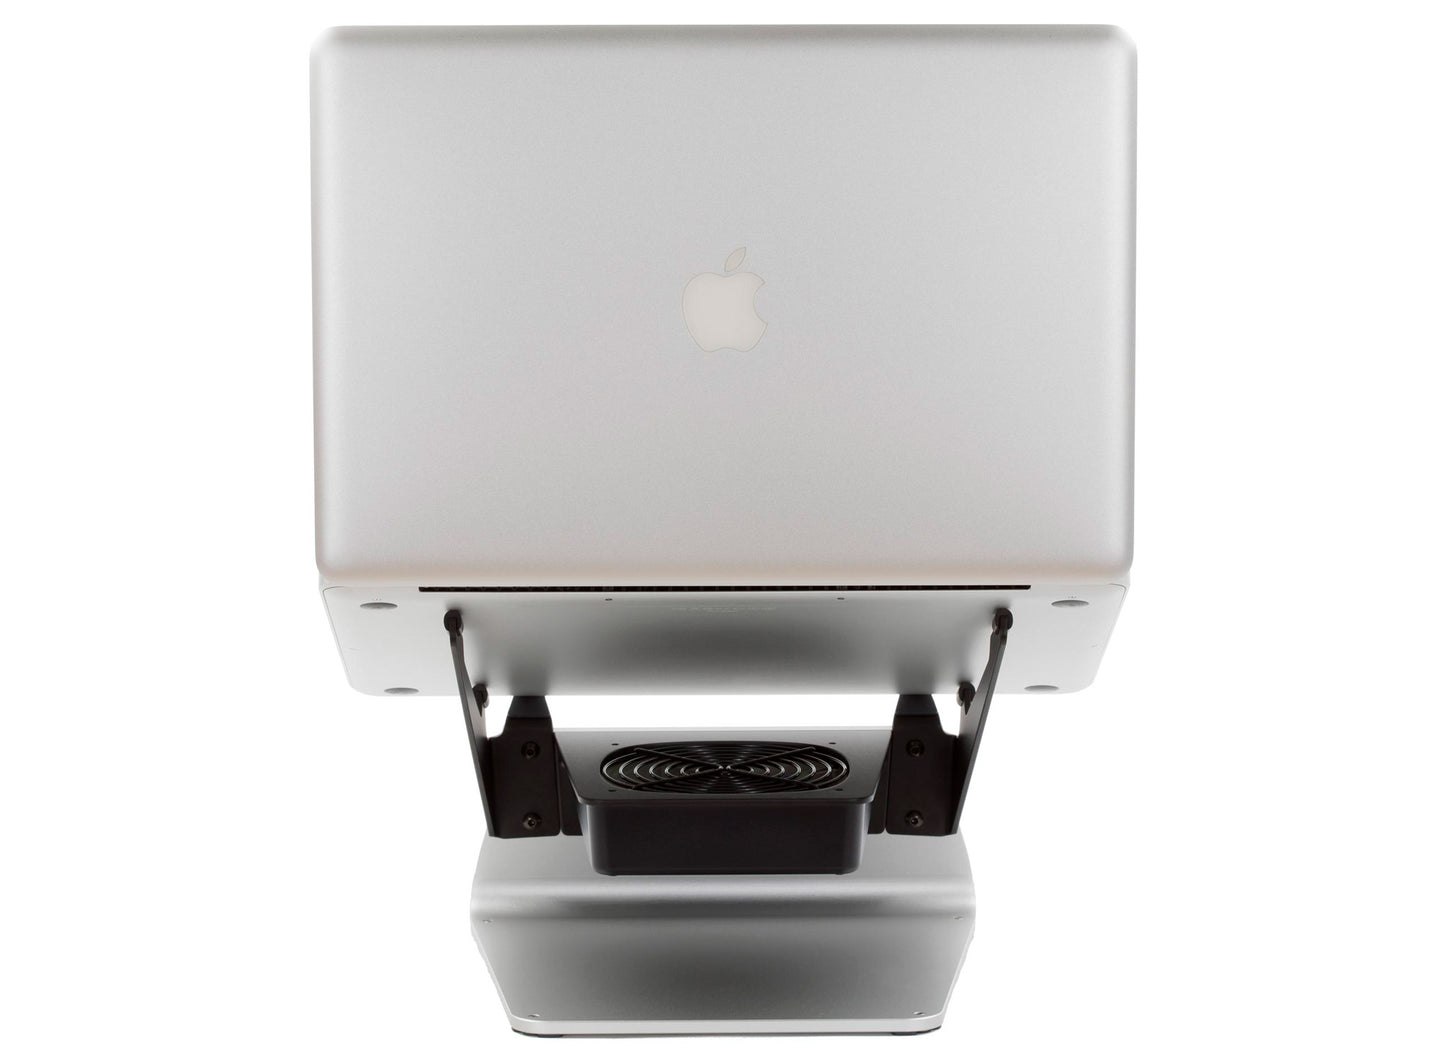 SVALT Cooling Stand model SxG17 silver back view for quiet fan cooling performance with Apple and PC laptops